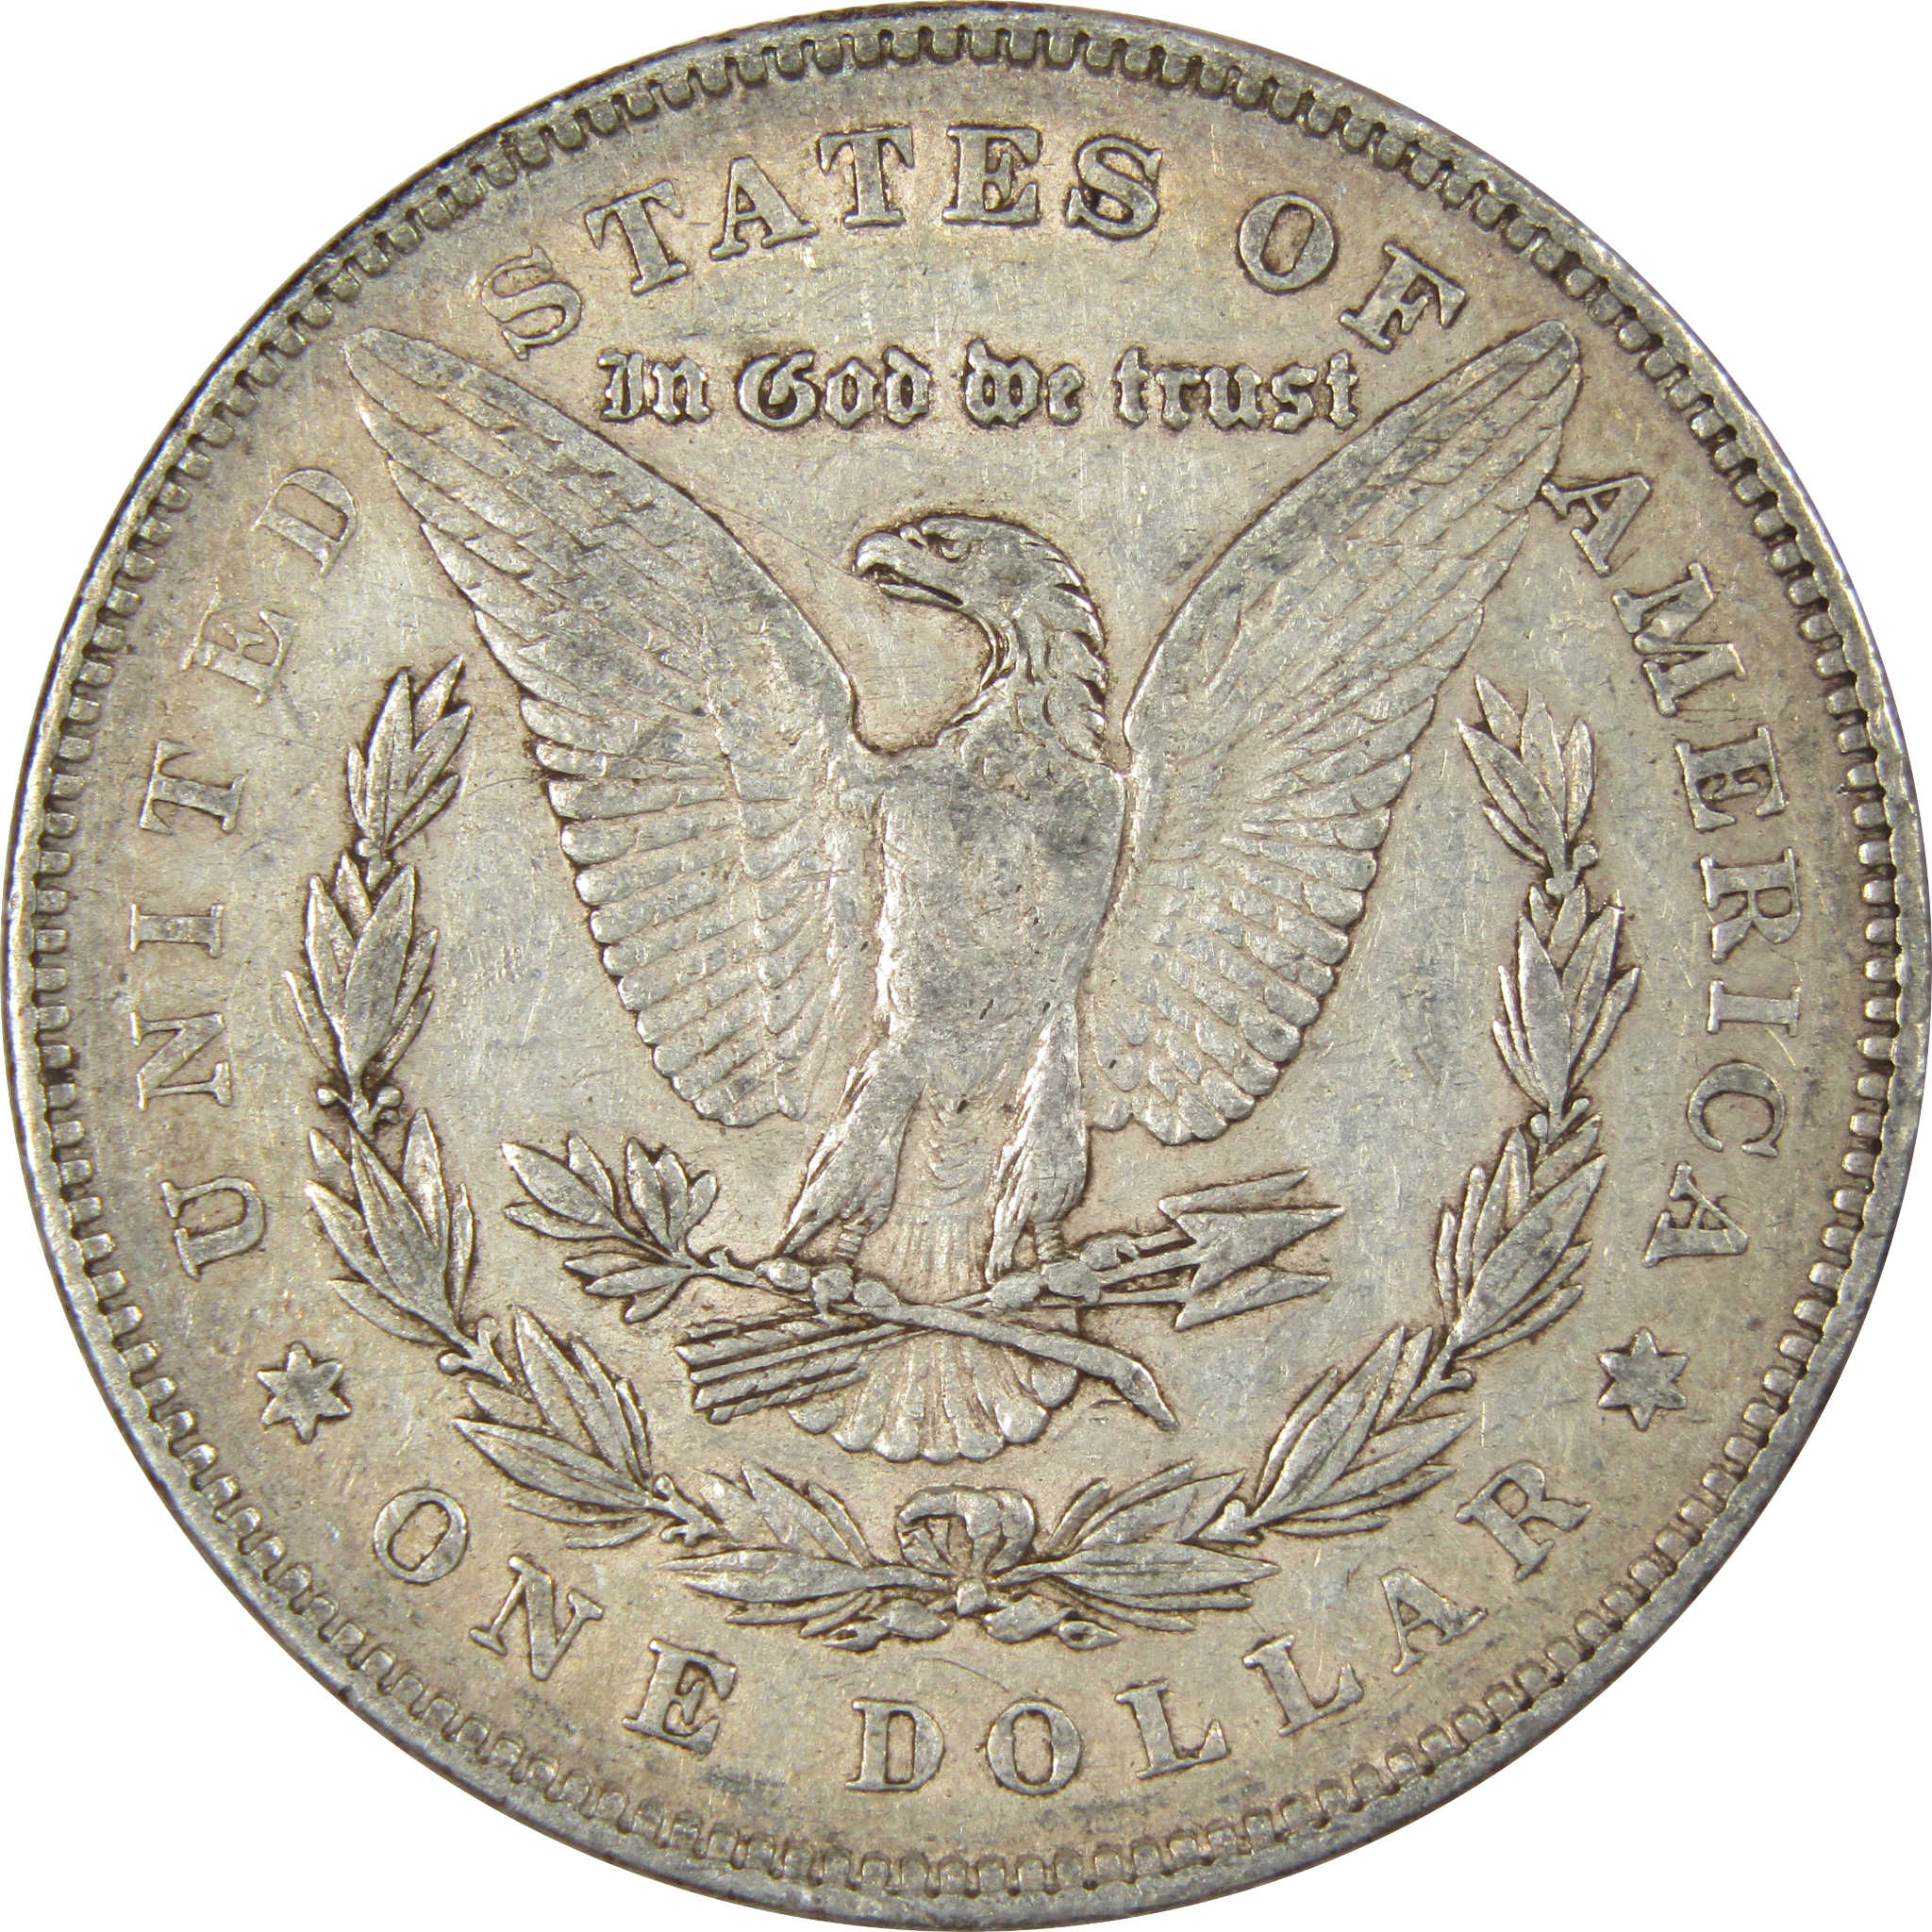 1878 7TF Rev 78 Morgan Dollar Extremely Fine 90% Silver SKU:IPC7239 - Morgan coin - Morgan silver dollar - Morgan silver dollar for sale - Profile Coins &amp; Collectibles